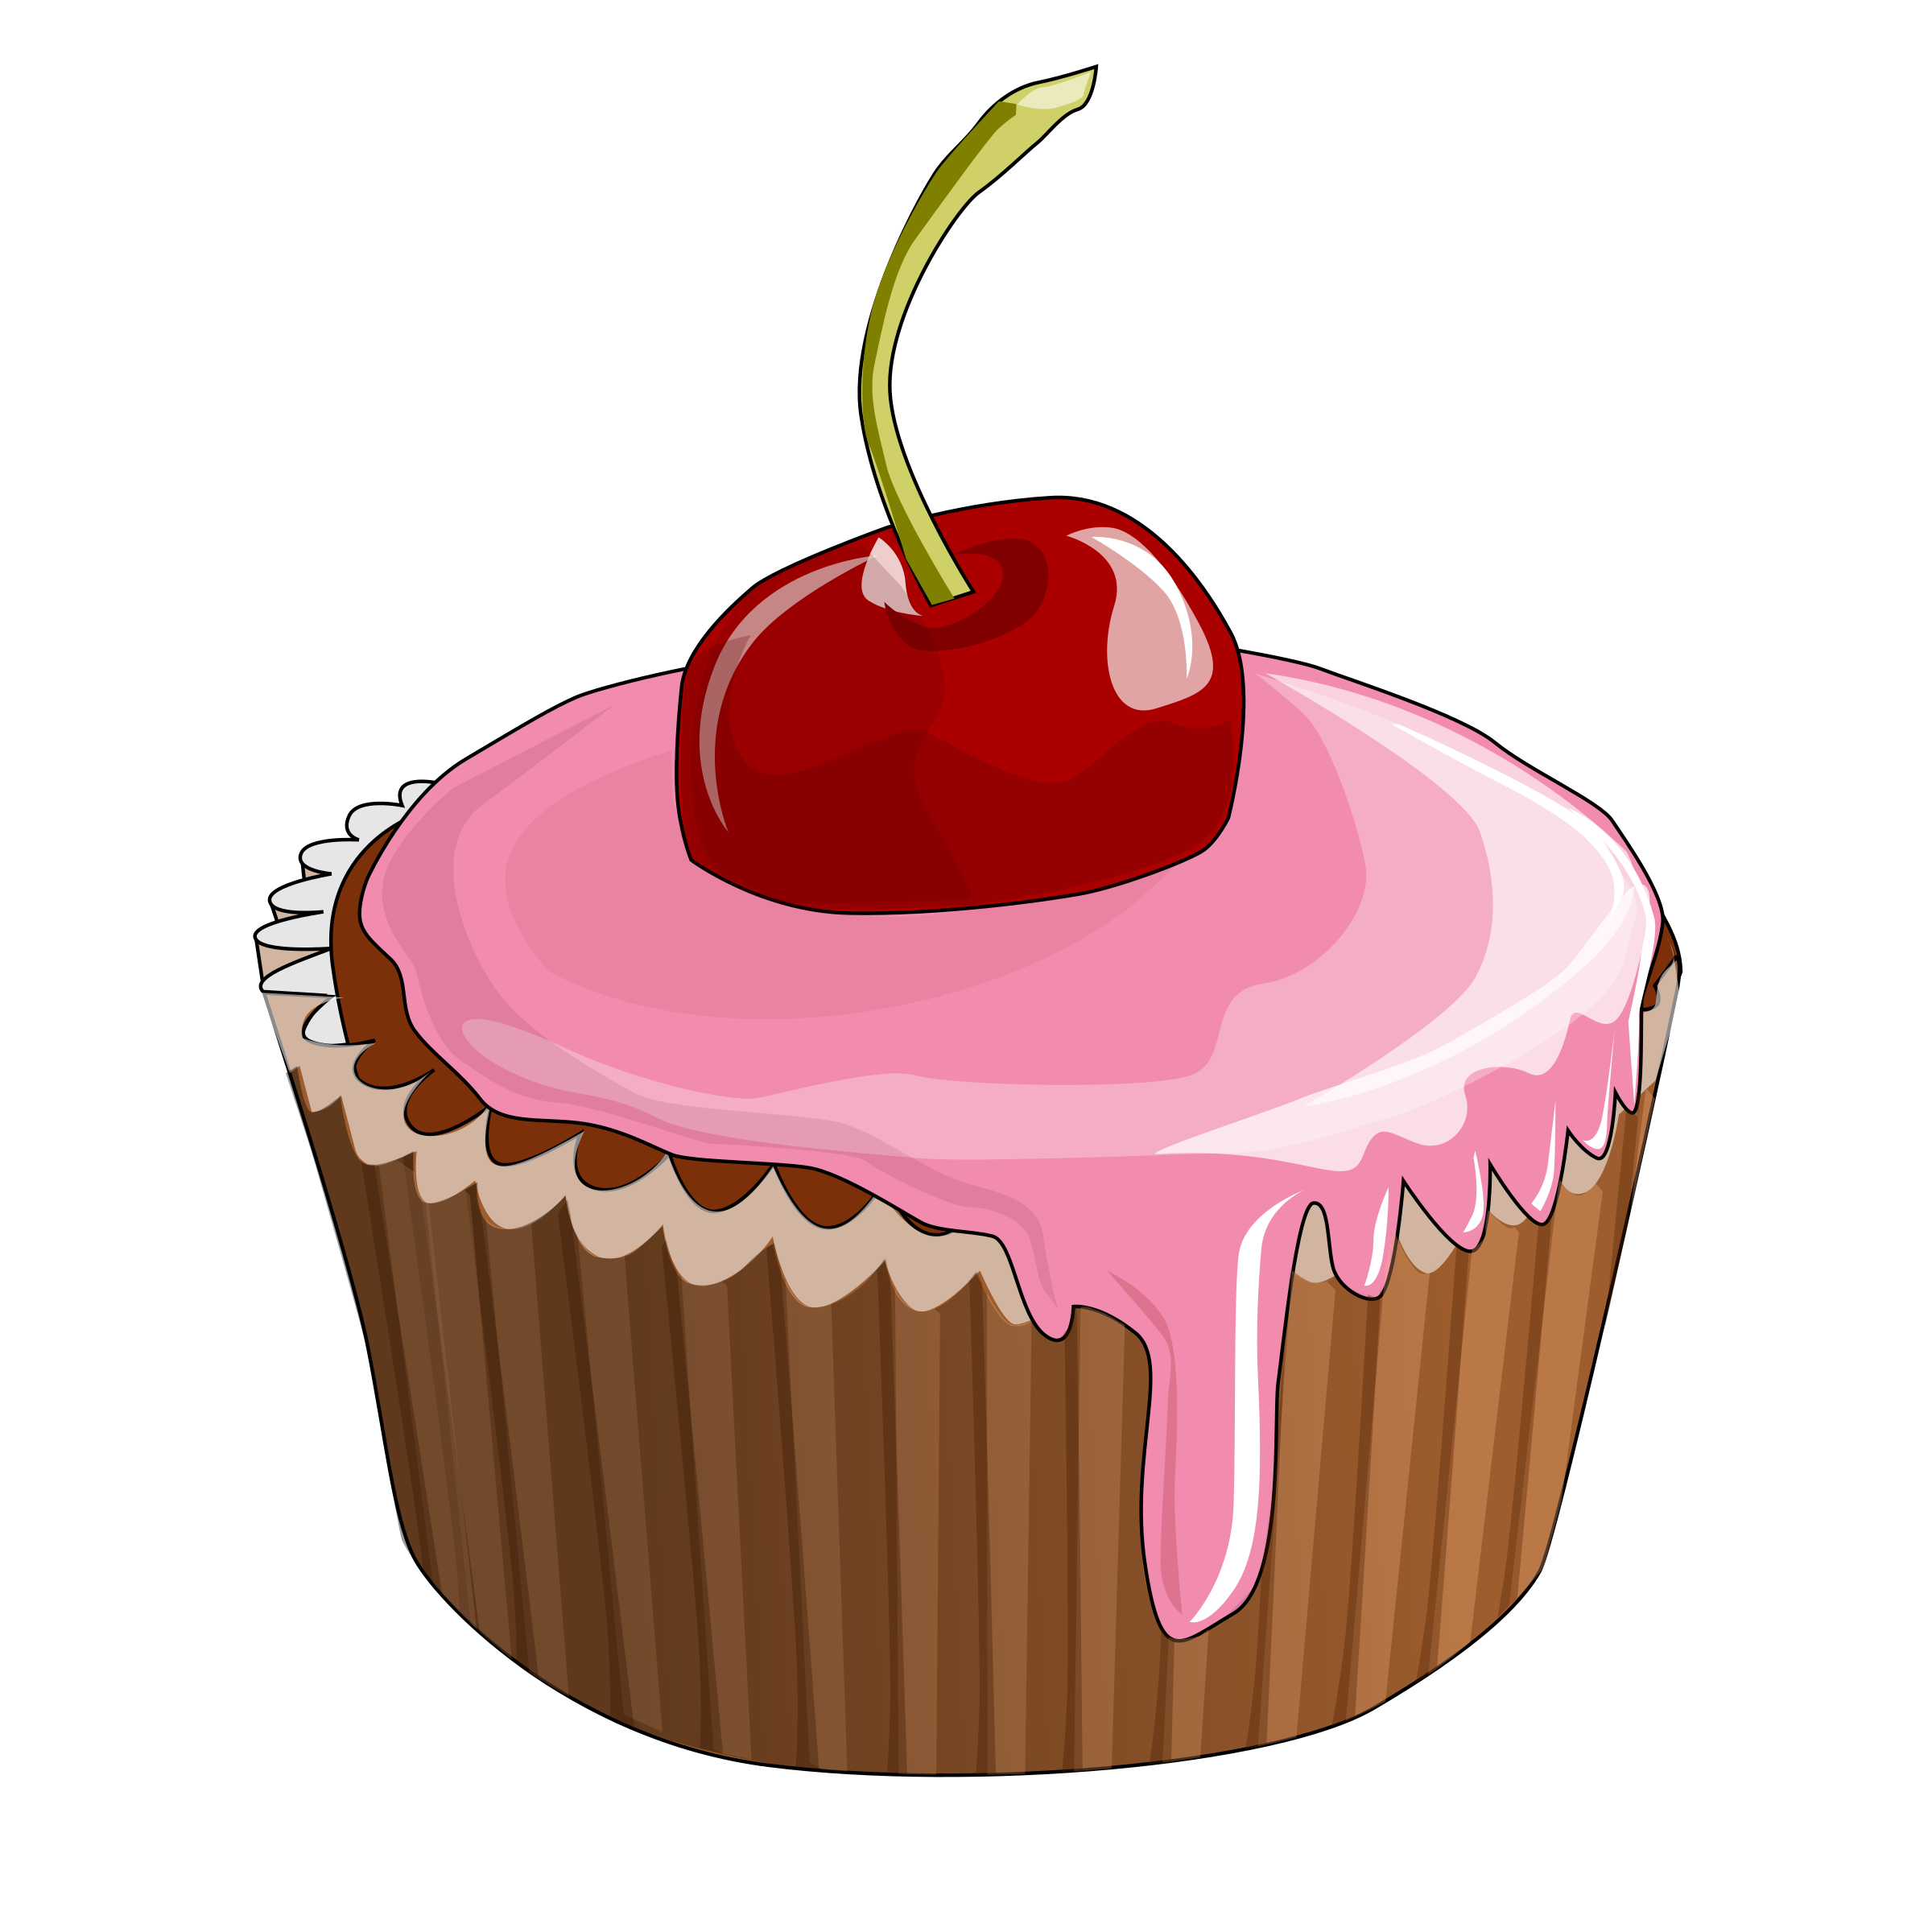 Cherry cupcake big image. Muffins clipart mom clipart